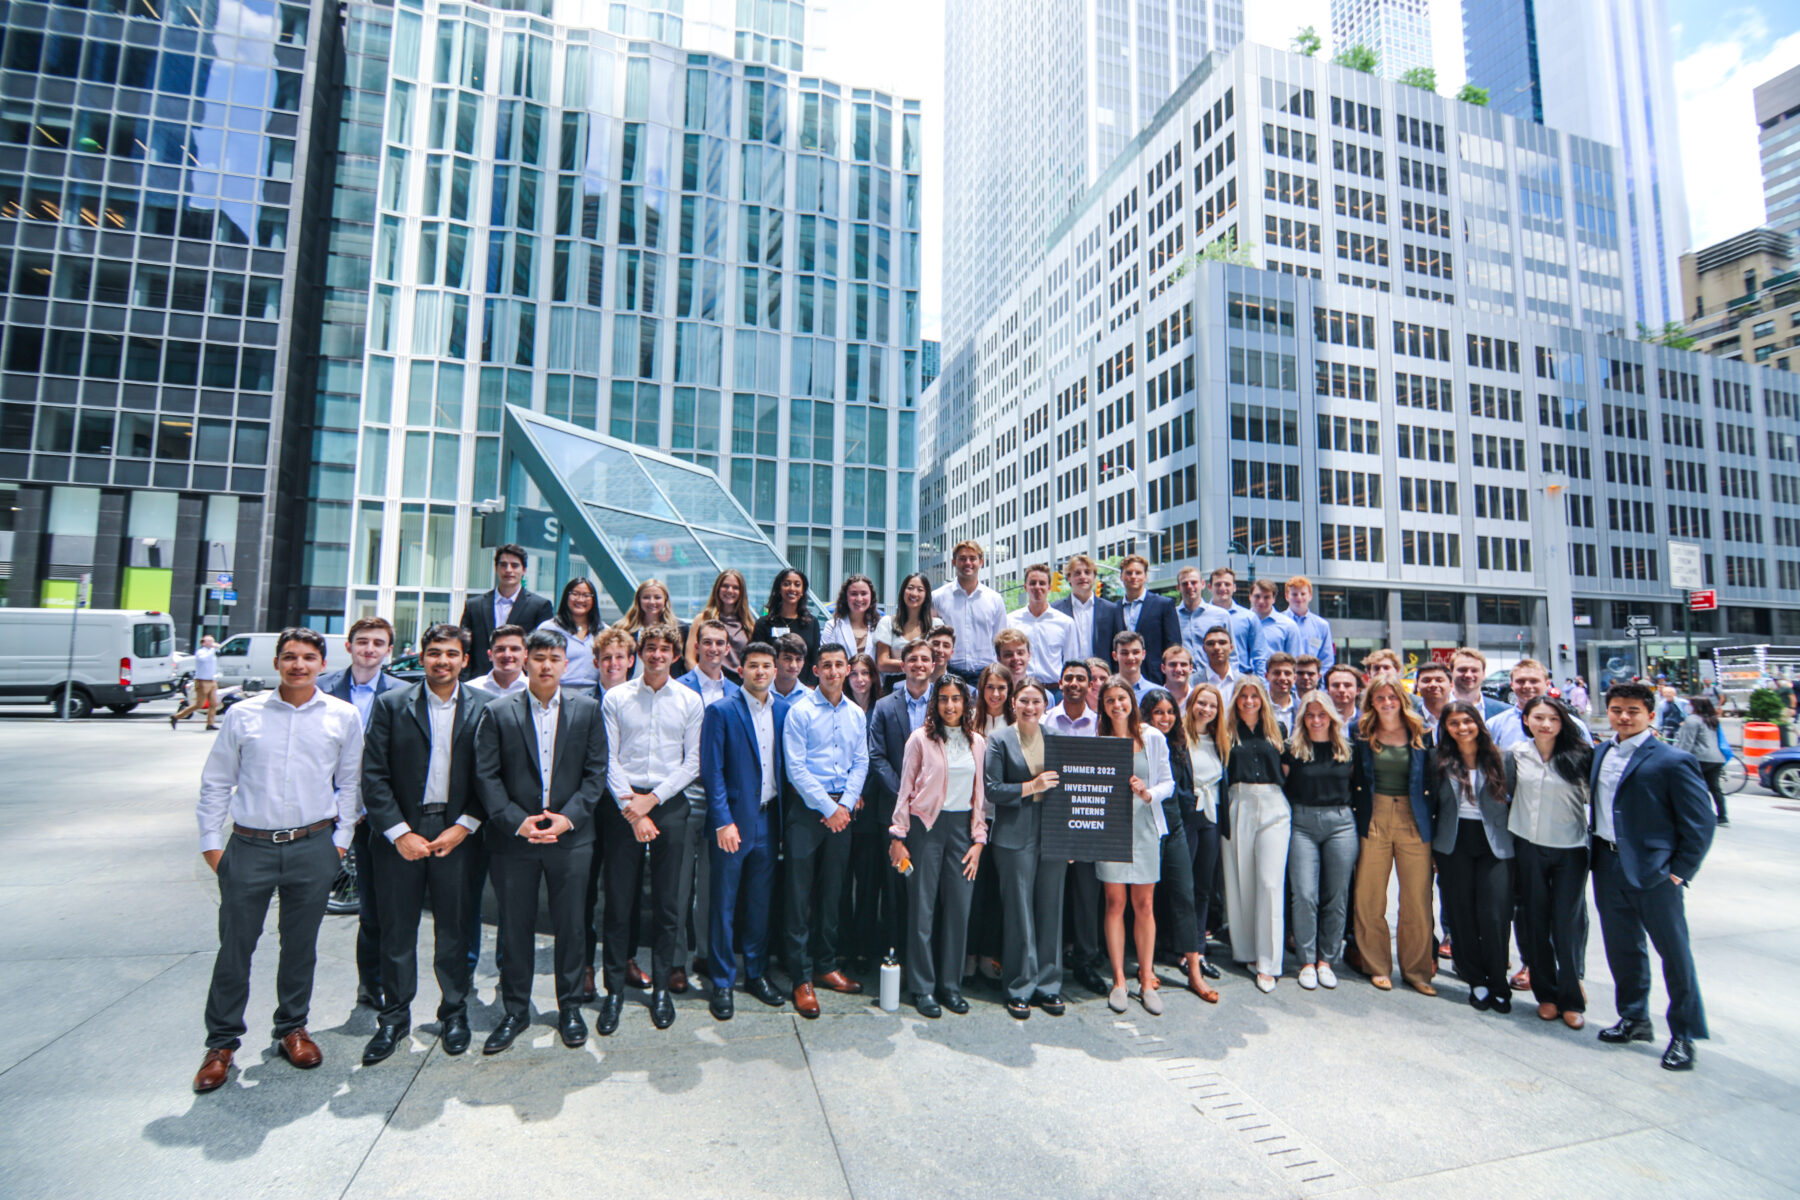 Large group of employees posing together for a photo outside with skyscrapers in the background